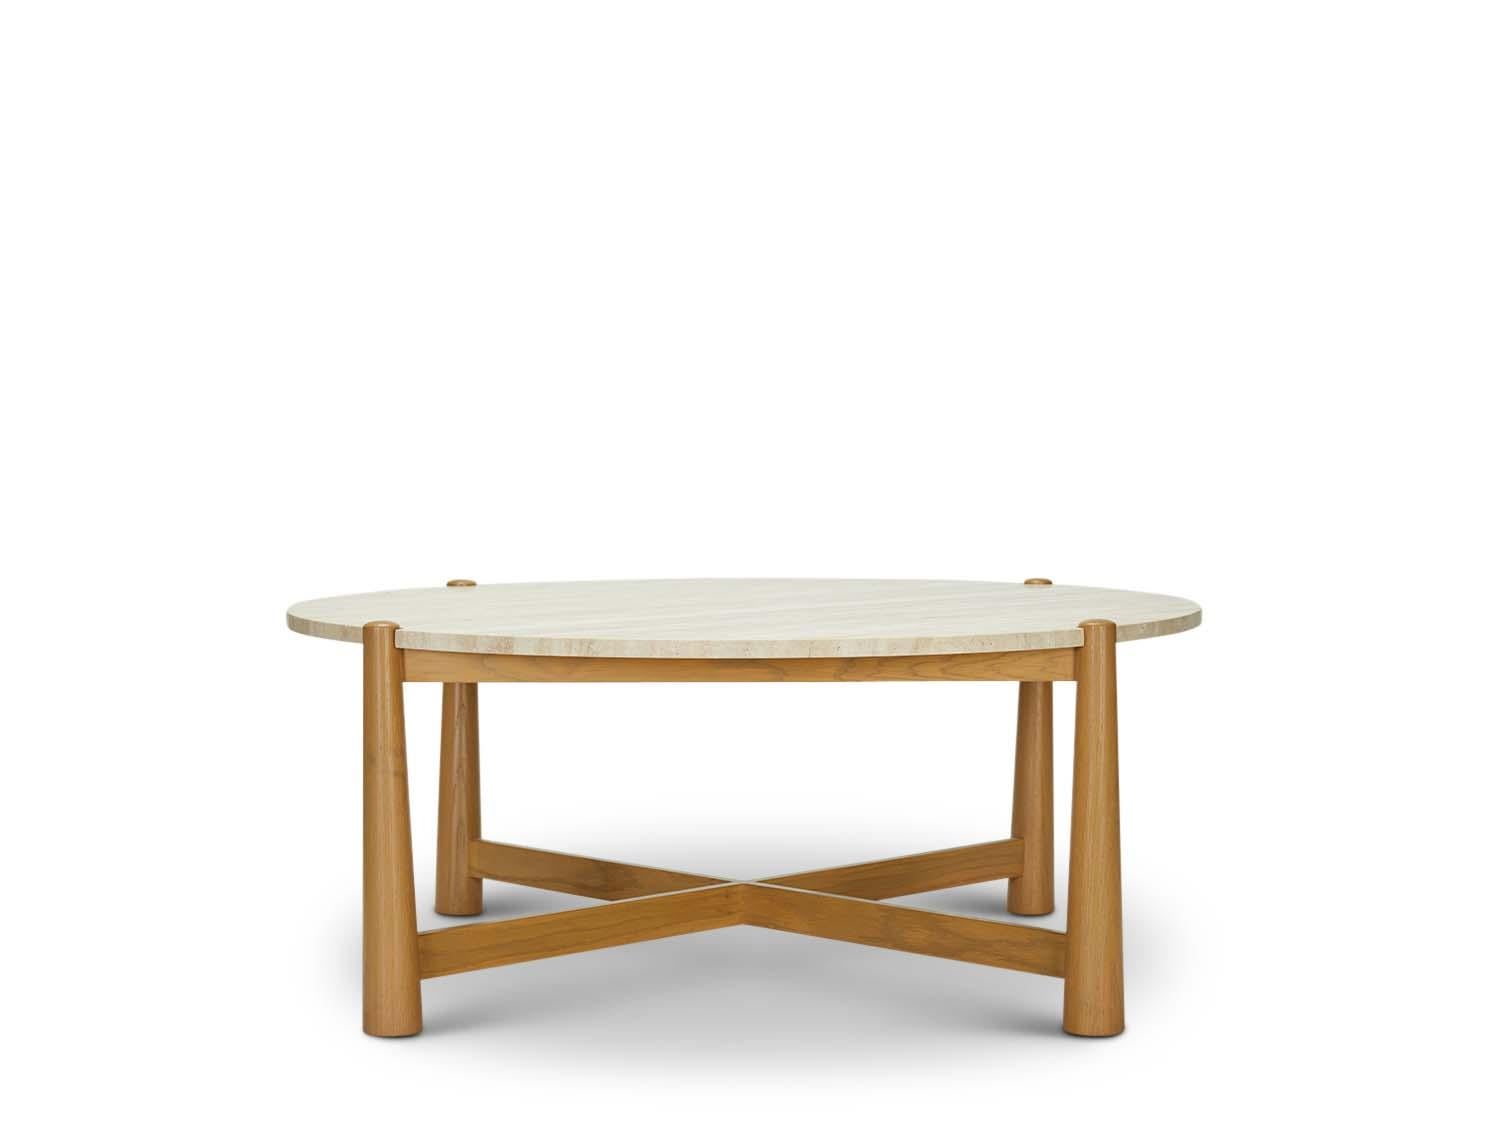 American Travertine and Oak Round Bronson Coffee Table by Lawson-Fenning